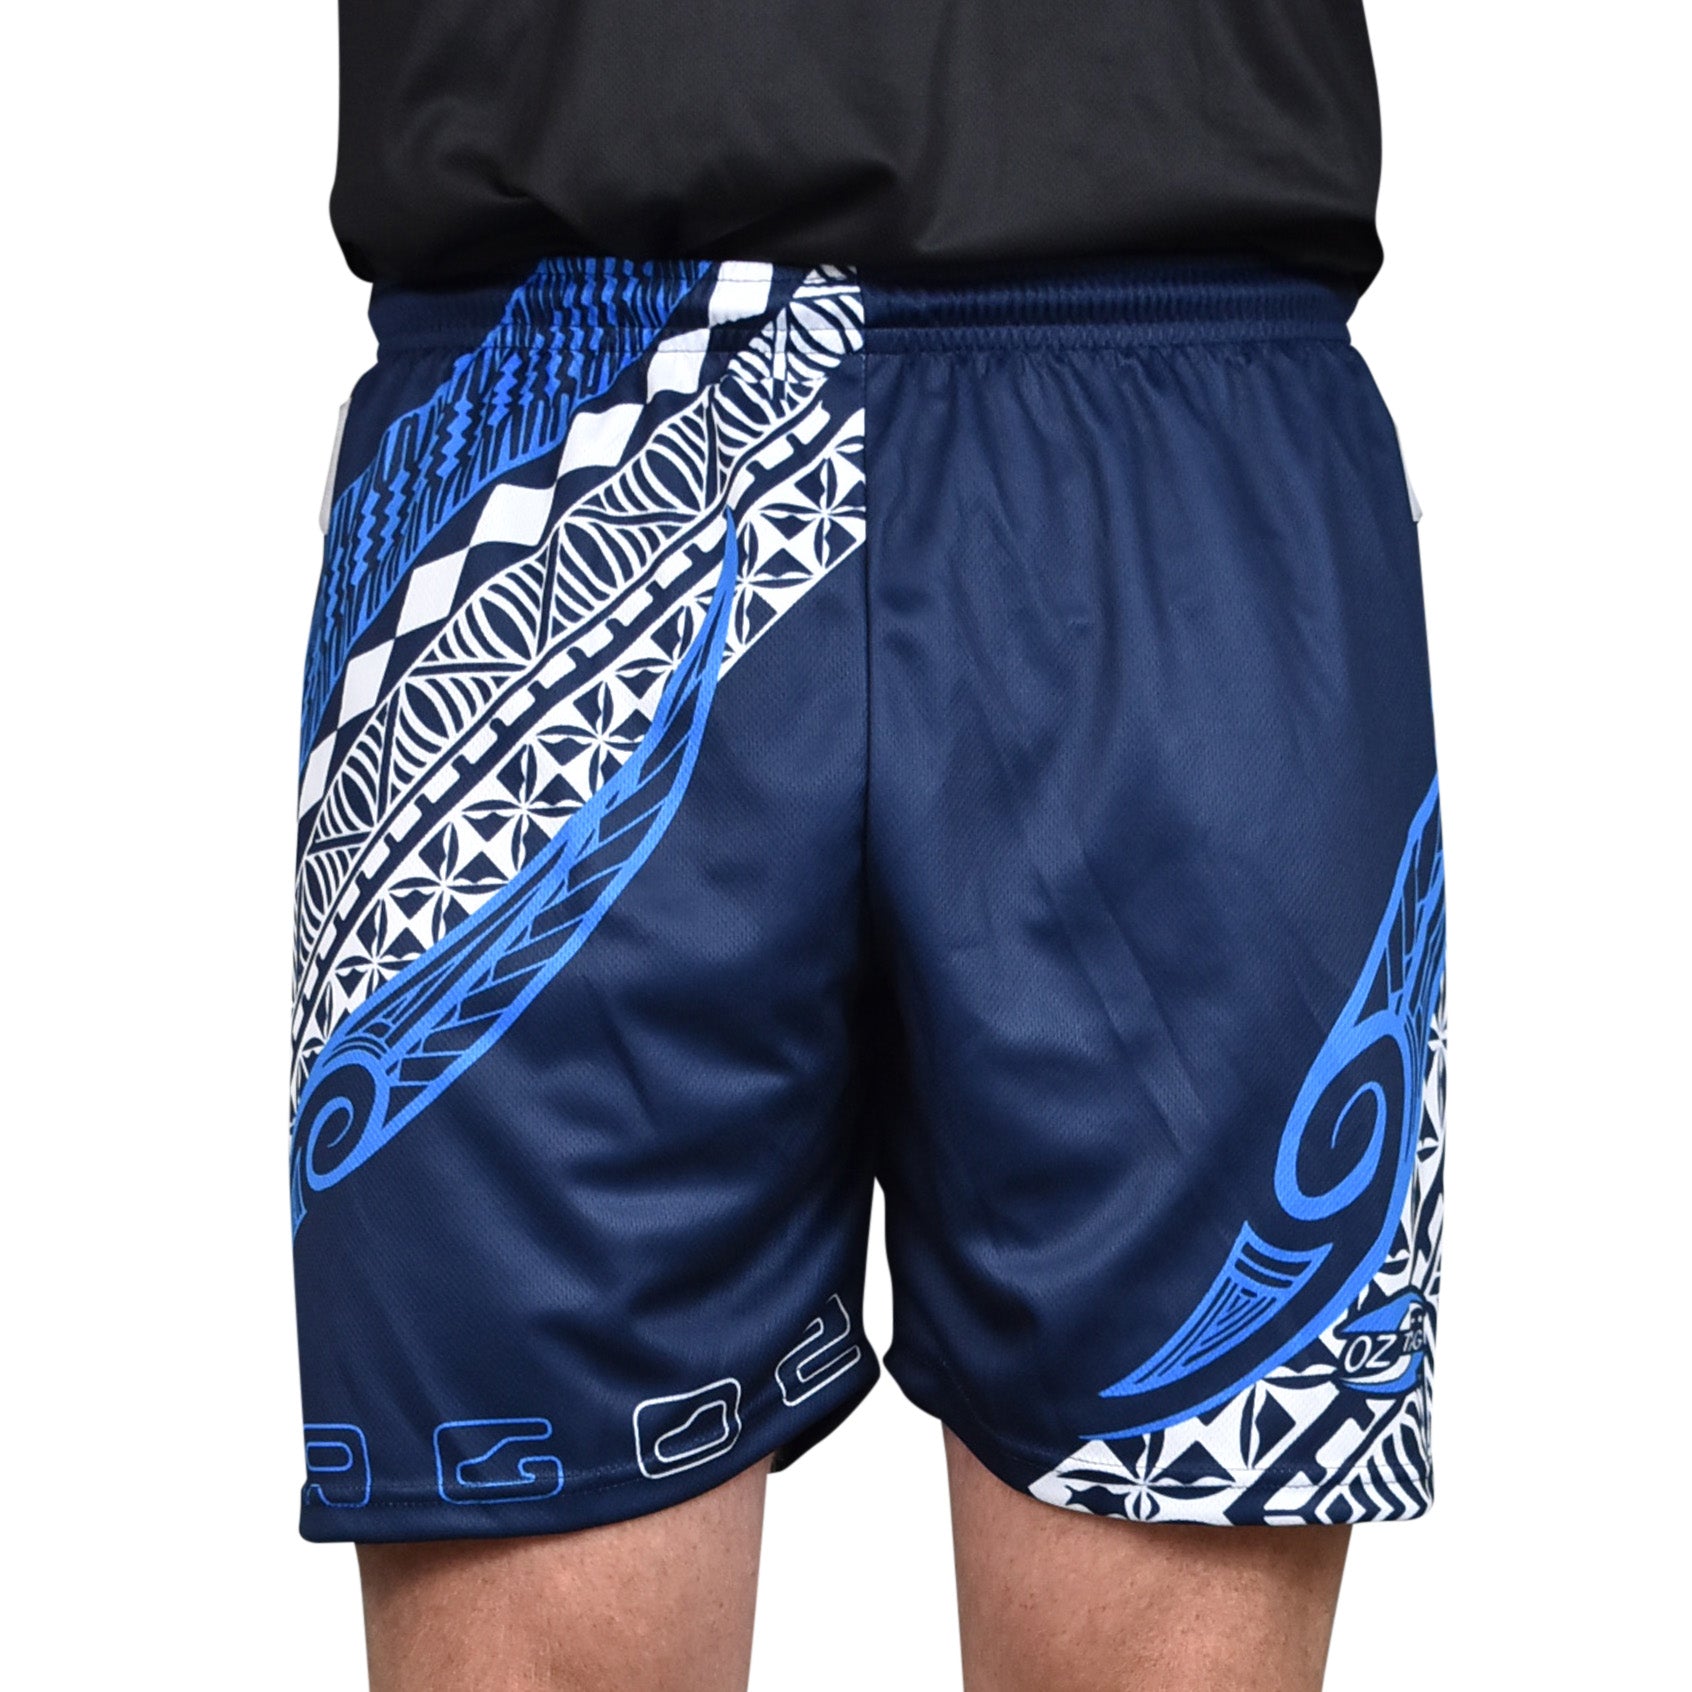 PACIFIC SHORTS – The Oztag Shop